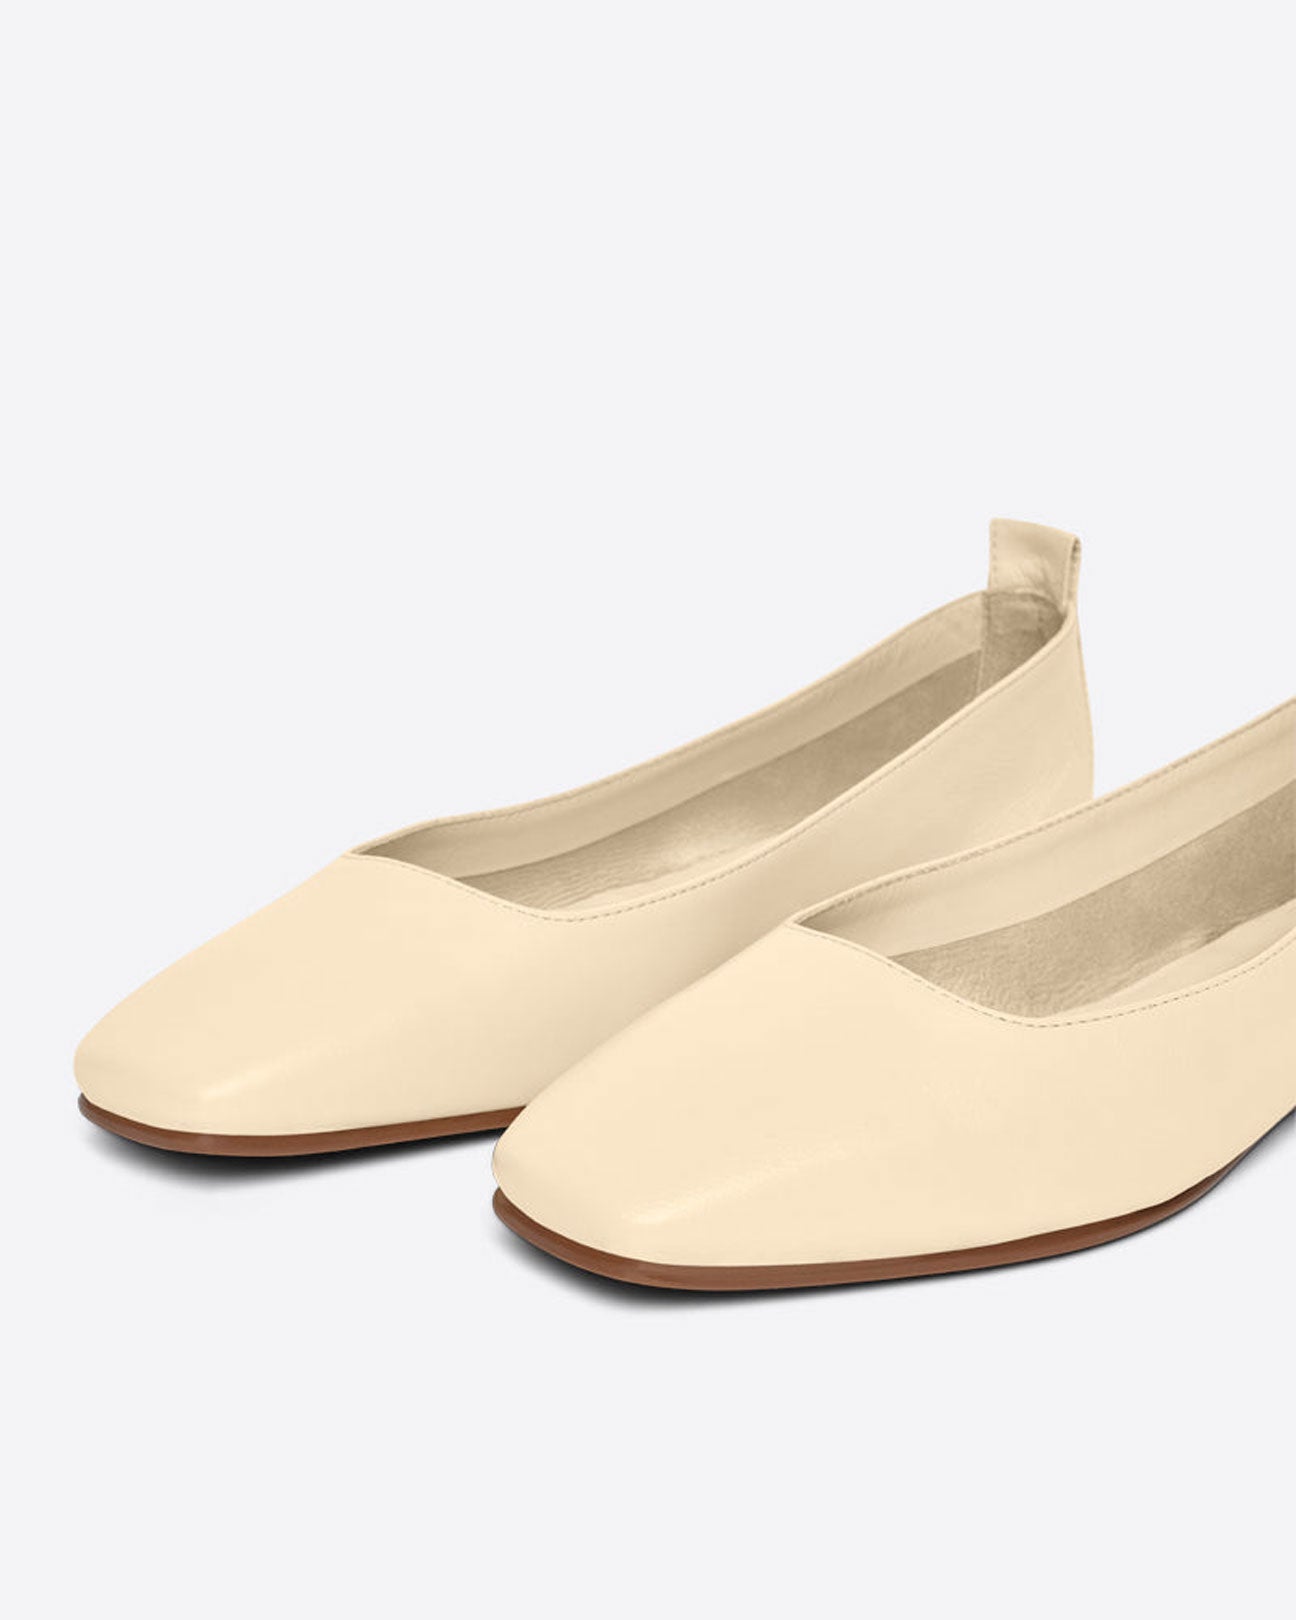 INTENTIONALLY BLANK Image Natural Sole Flat in Eggnog available at Lahn.shop